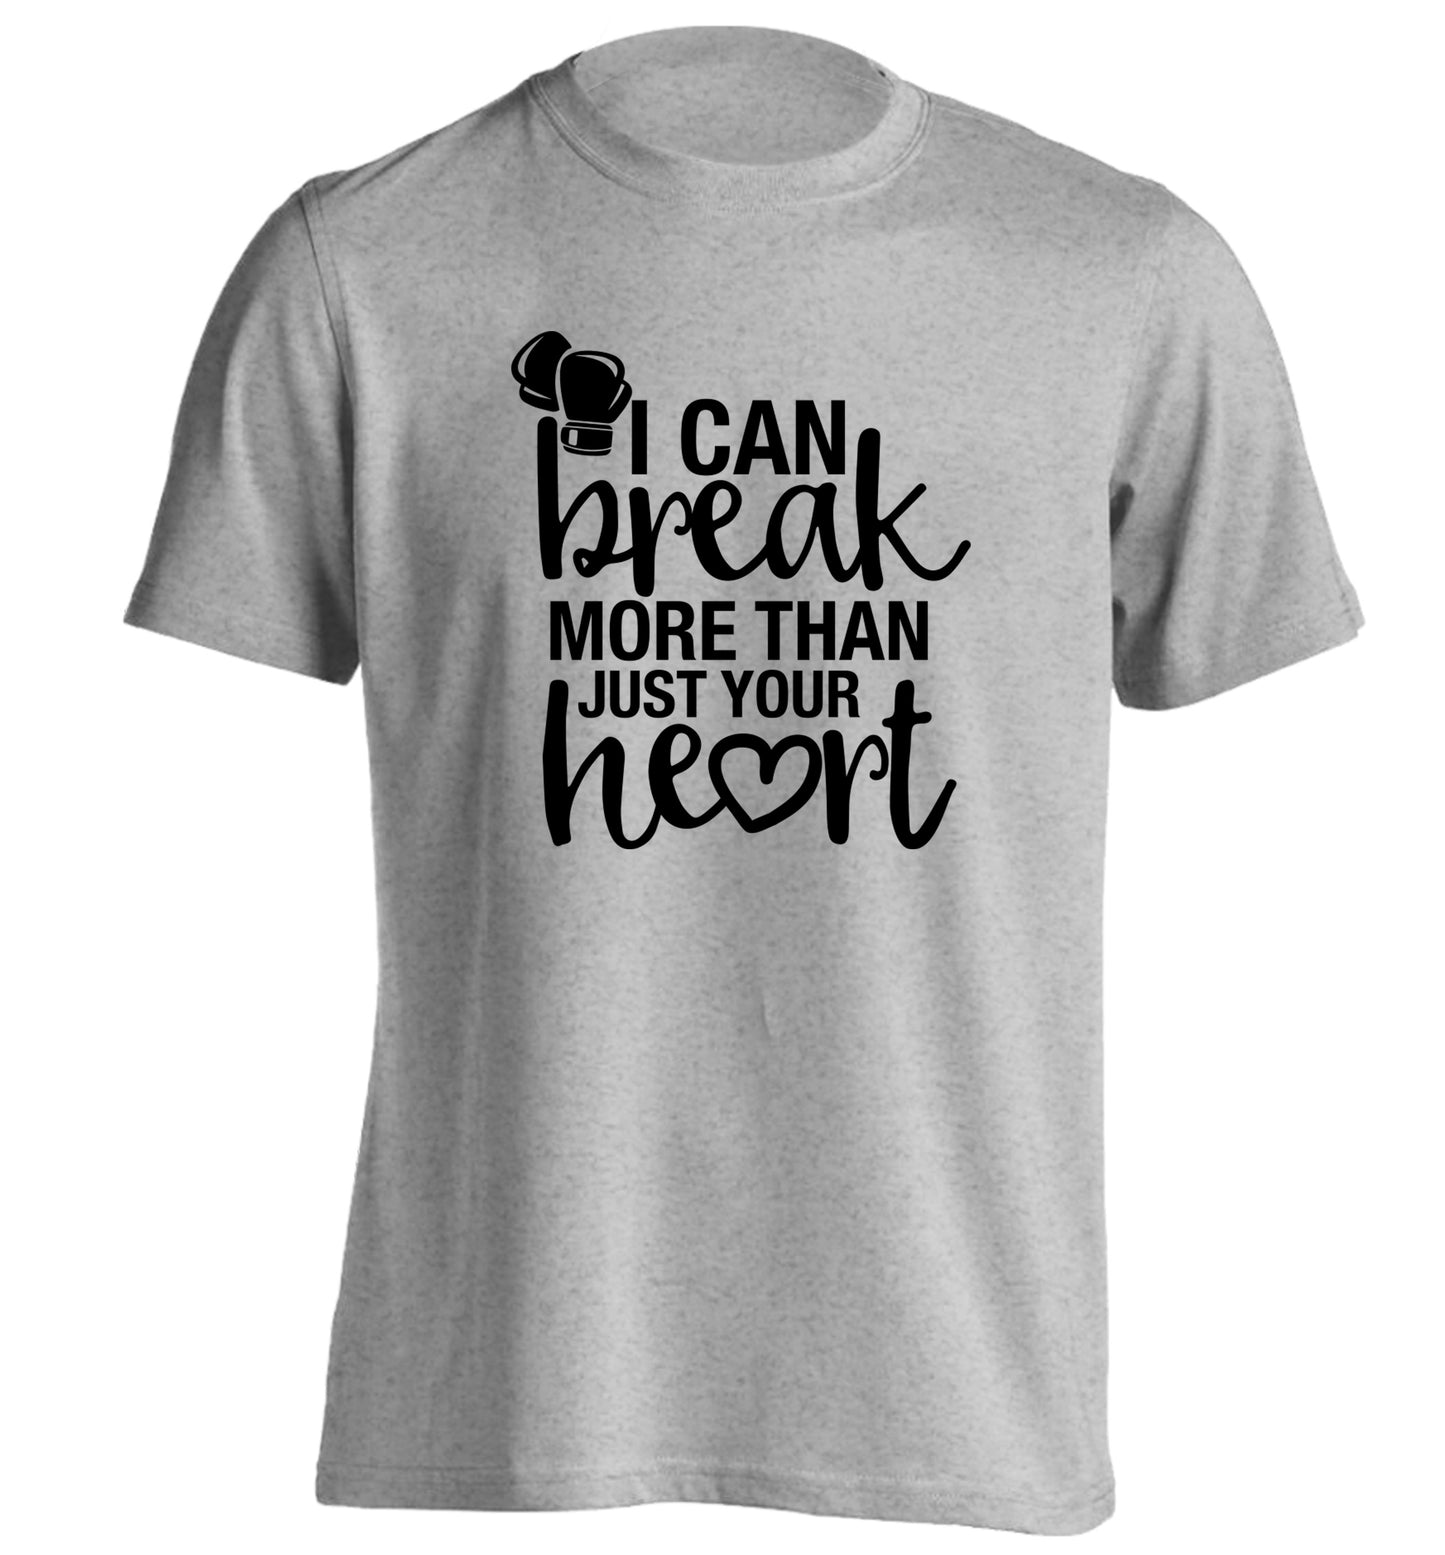 I can break more than just your heart adults unisex grey Tshirt 2XL